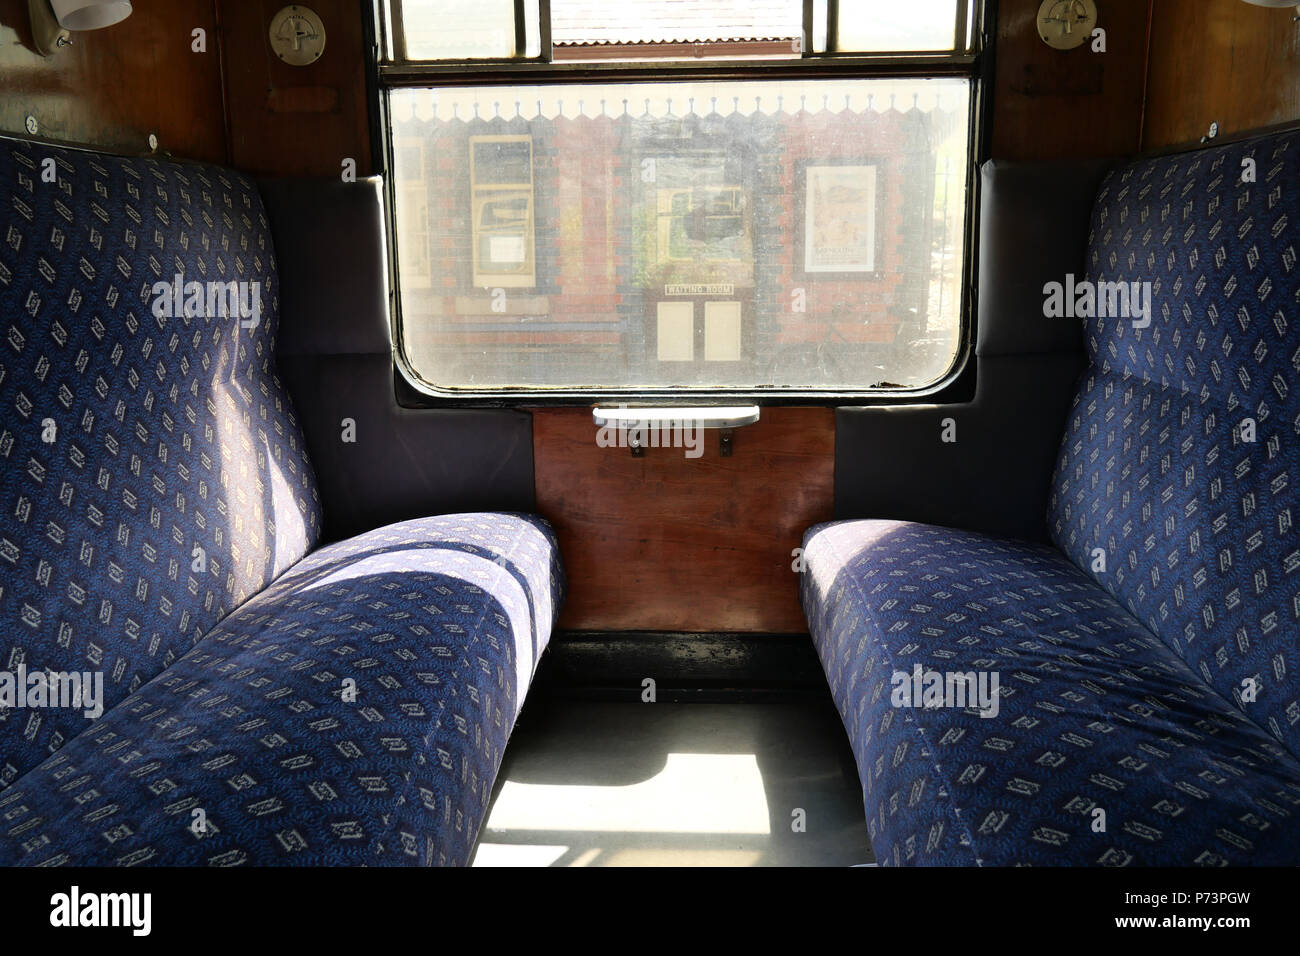 July 03 2018 - Carrog railway station, Wales, UK. Inside on of the Corridor Carriages fitted to the Class 37 Locomotive. Stock Photo